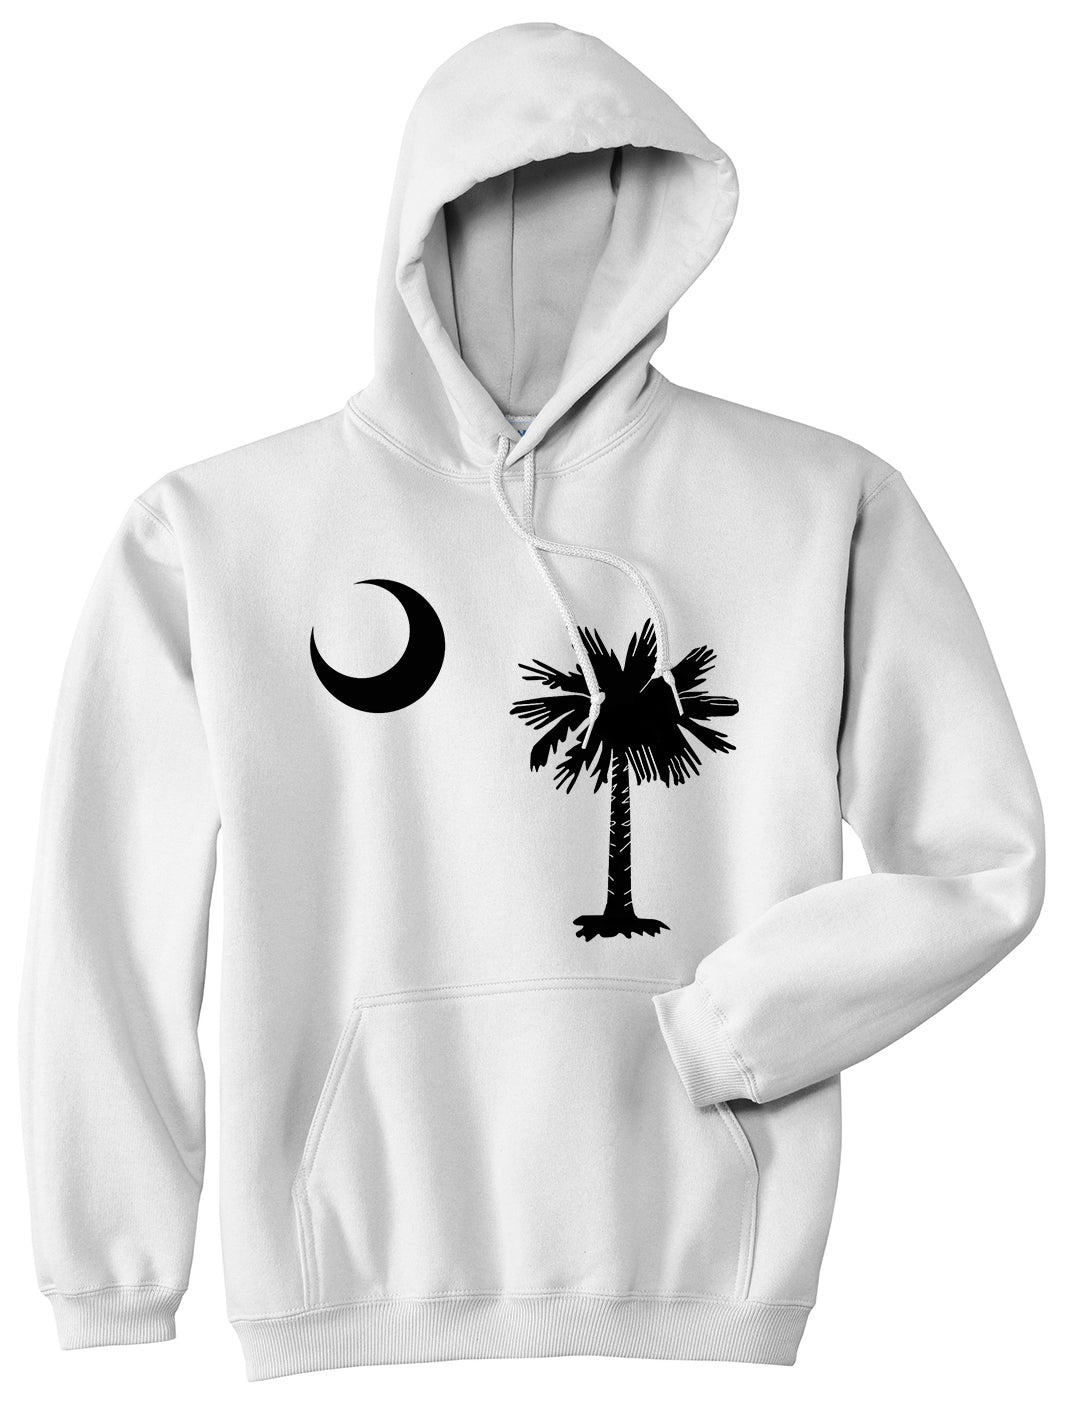 South Carolina State Flag Outline Mens Pullover Hoodie White